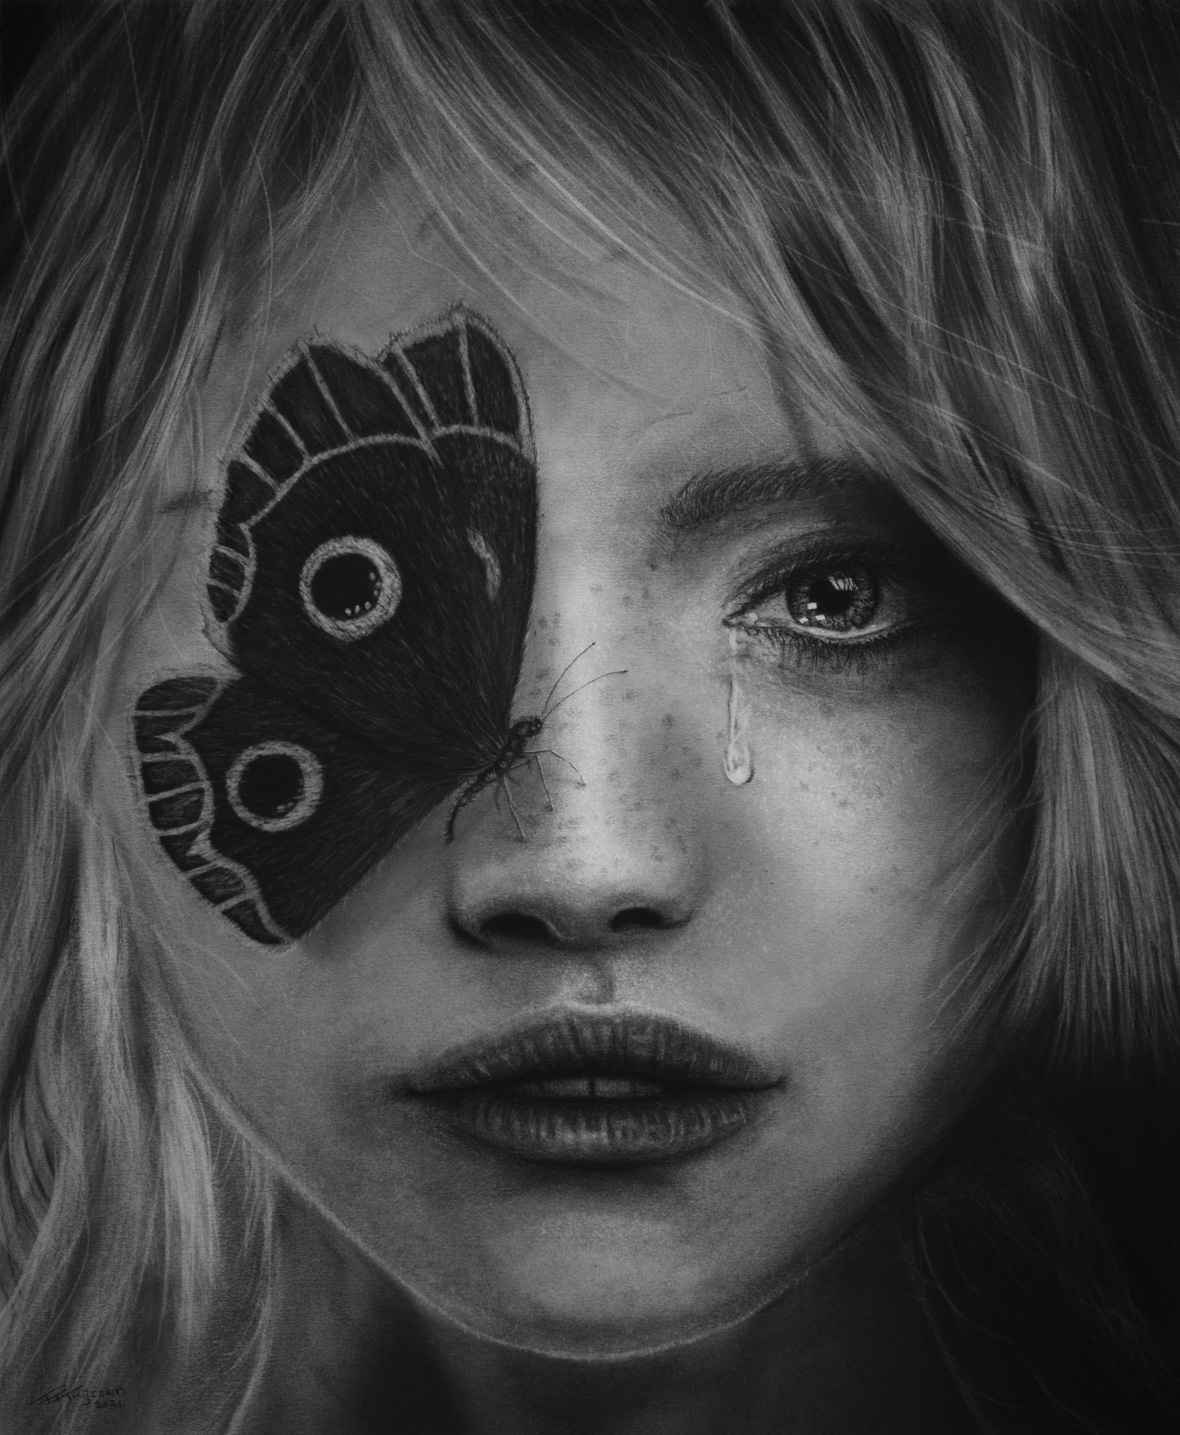 The Butterfly Girl by Thomas Thijssen charcoal drawing 2021